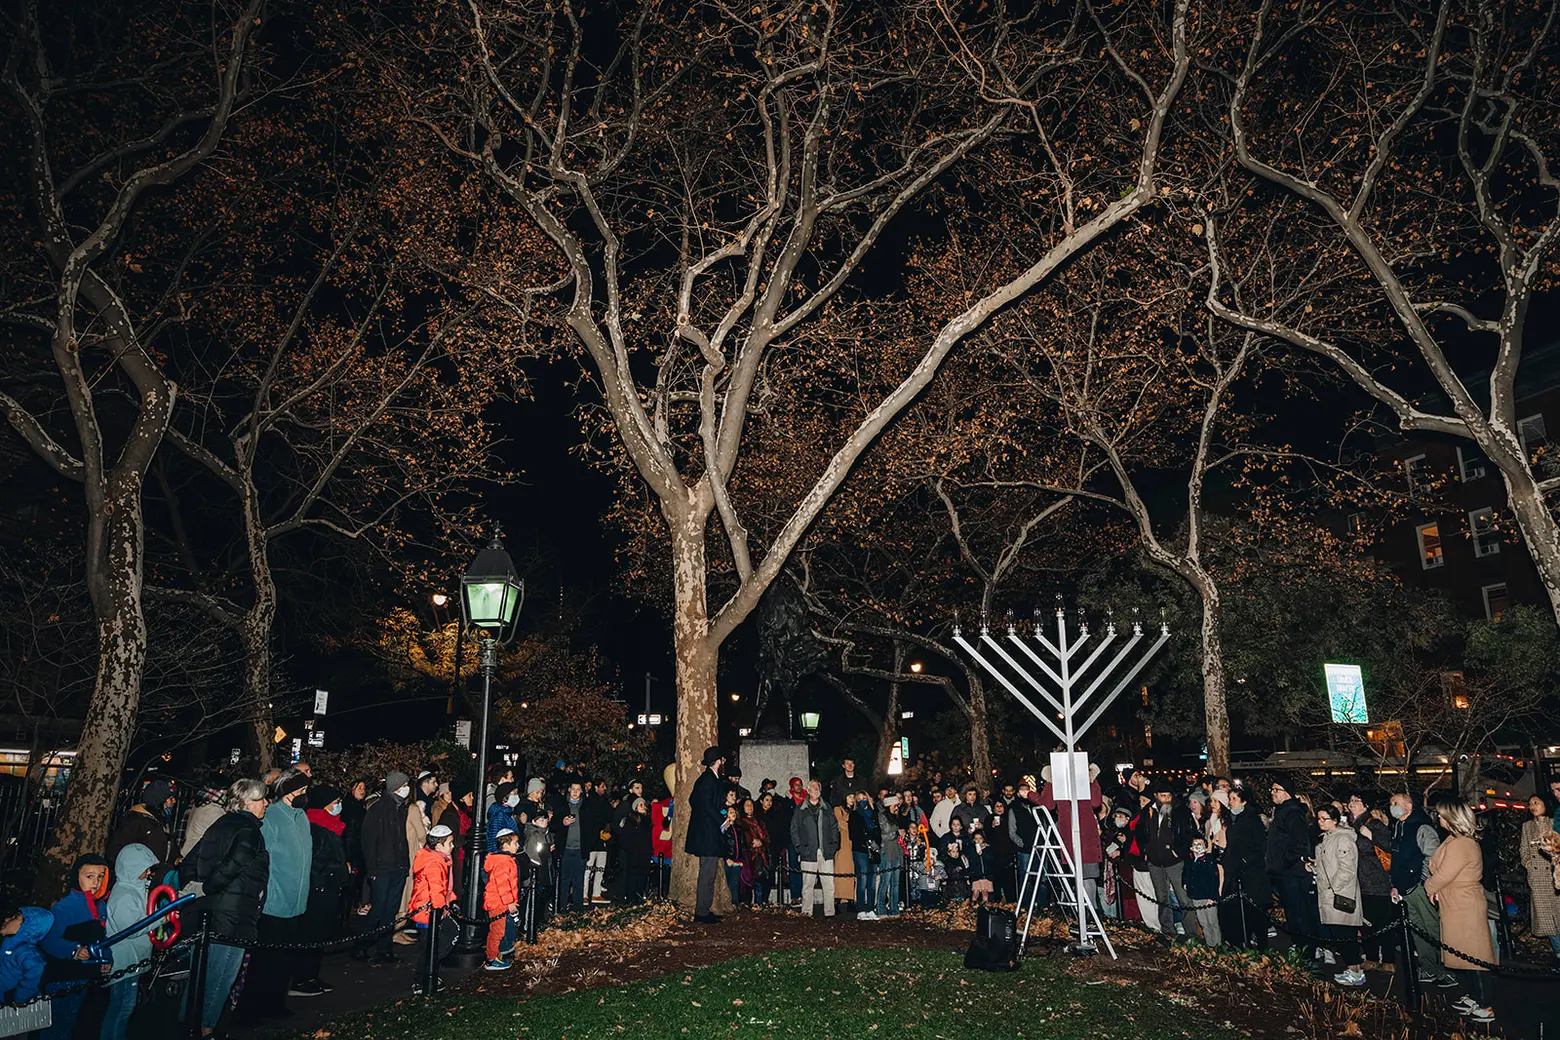 16 Hanukkah celebrations and ceremonies taking place in NYC this year